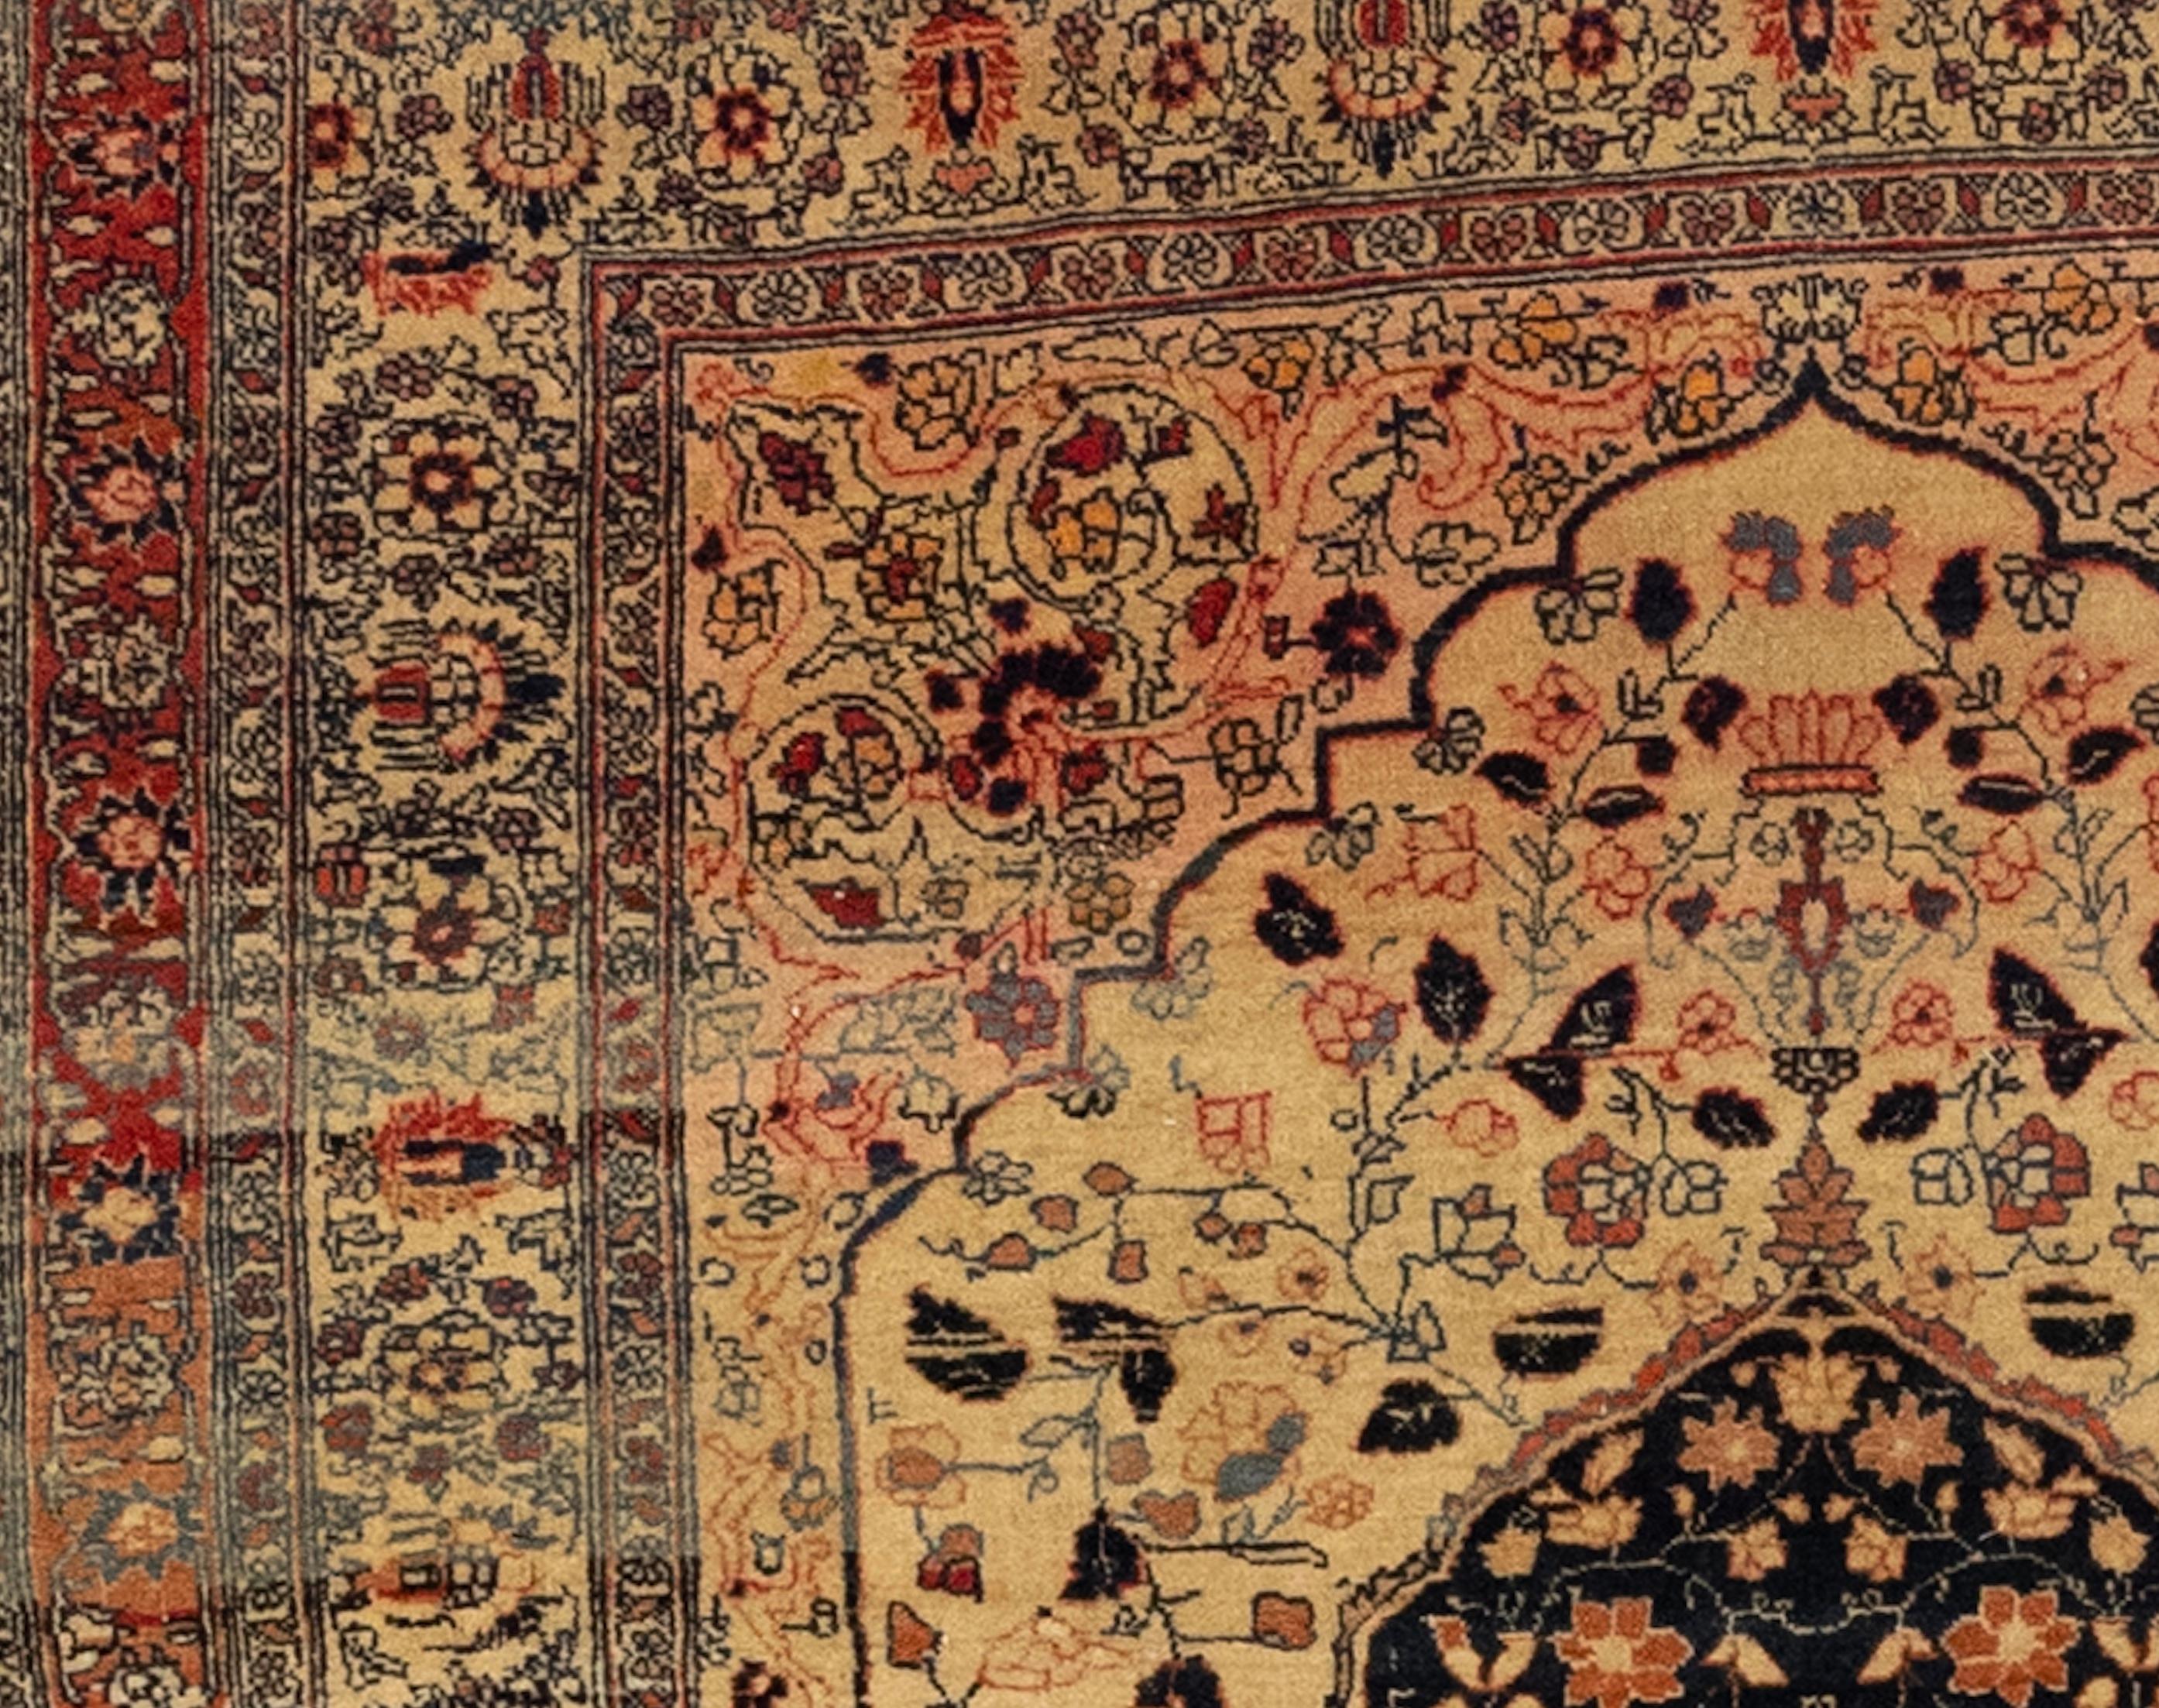 The Haji Jalili Tabriz rug is a highly sought-after antique rug known for its exquisite craftsmanship and timeless beauty. Named after its creator, Haji Jalili, a renowned master weaver from Tabriz, Iran, these rugs are considered among the finest